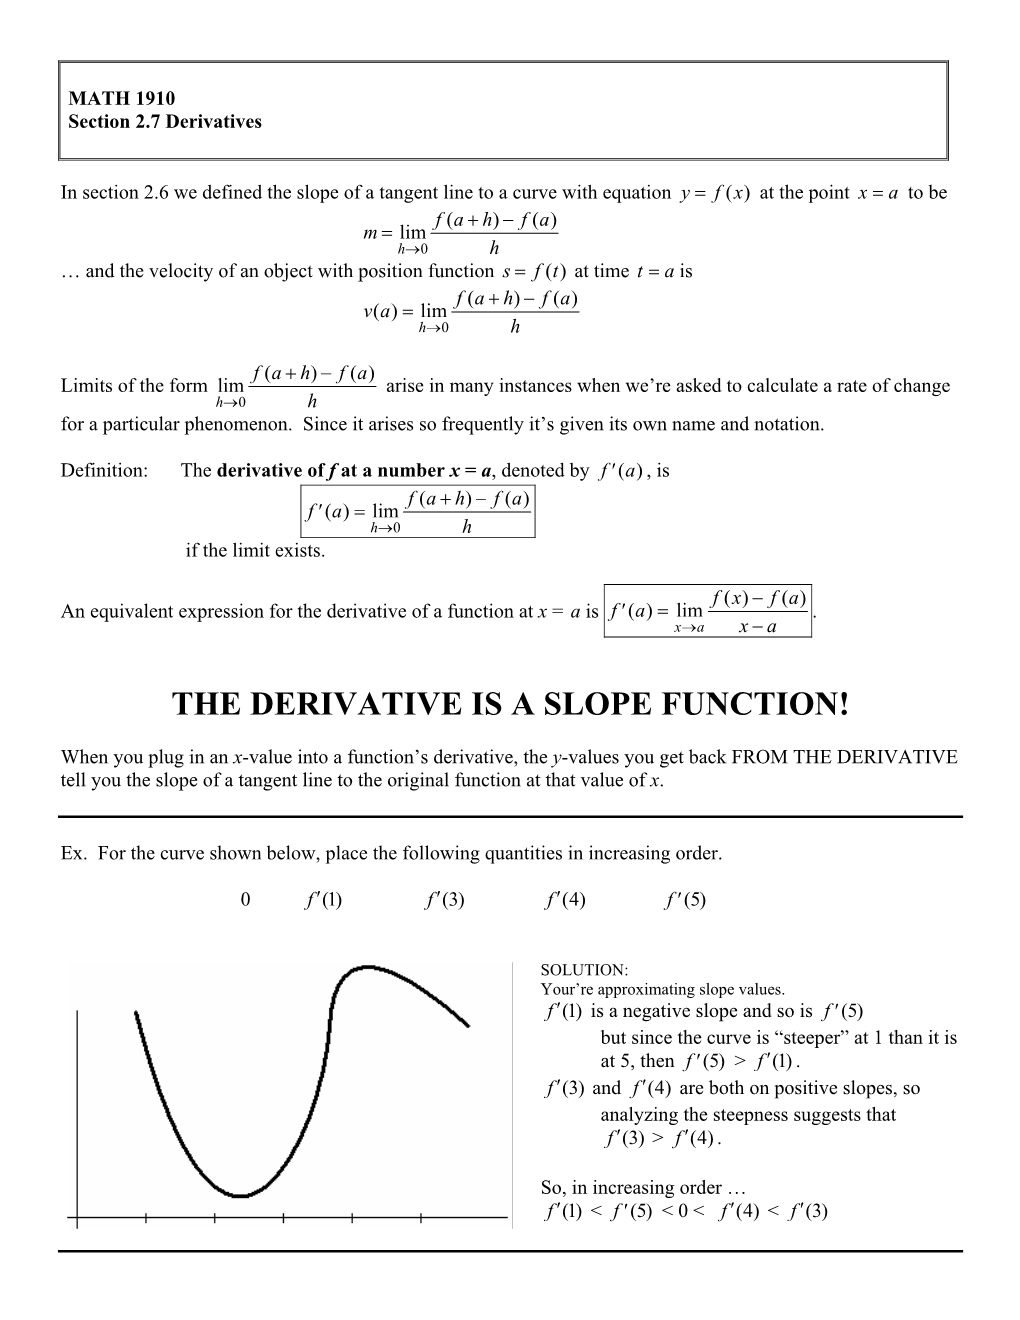 The Derivative Is a Slope Function!